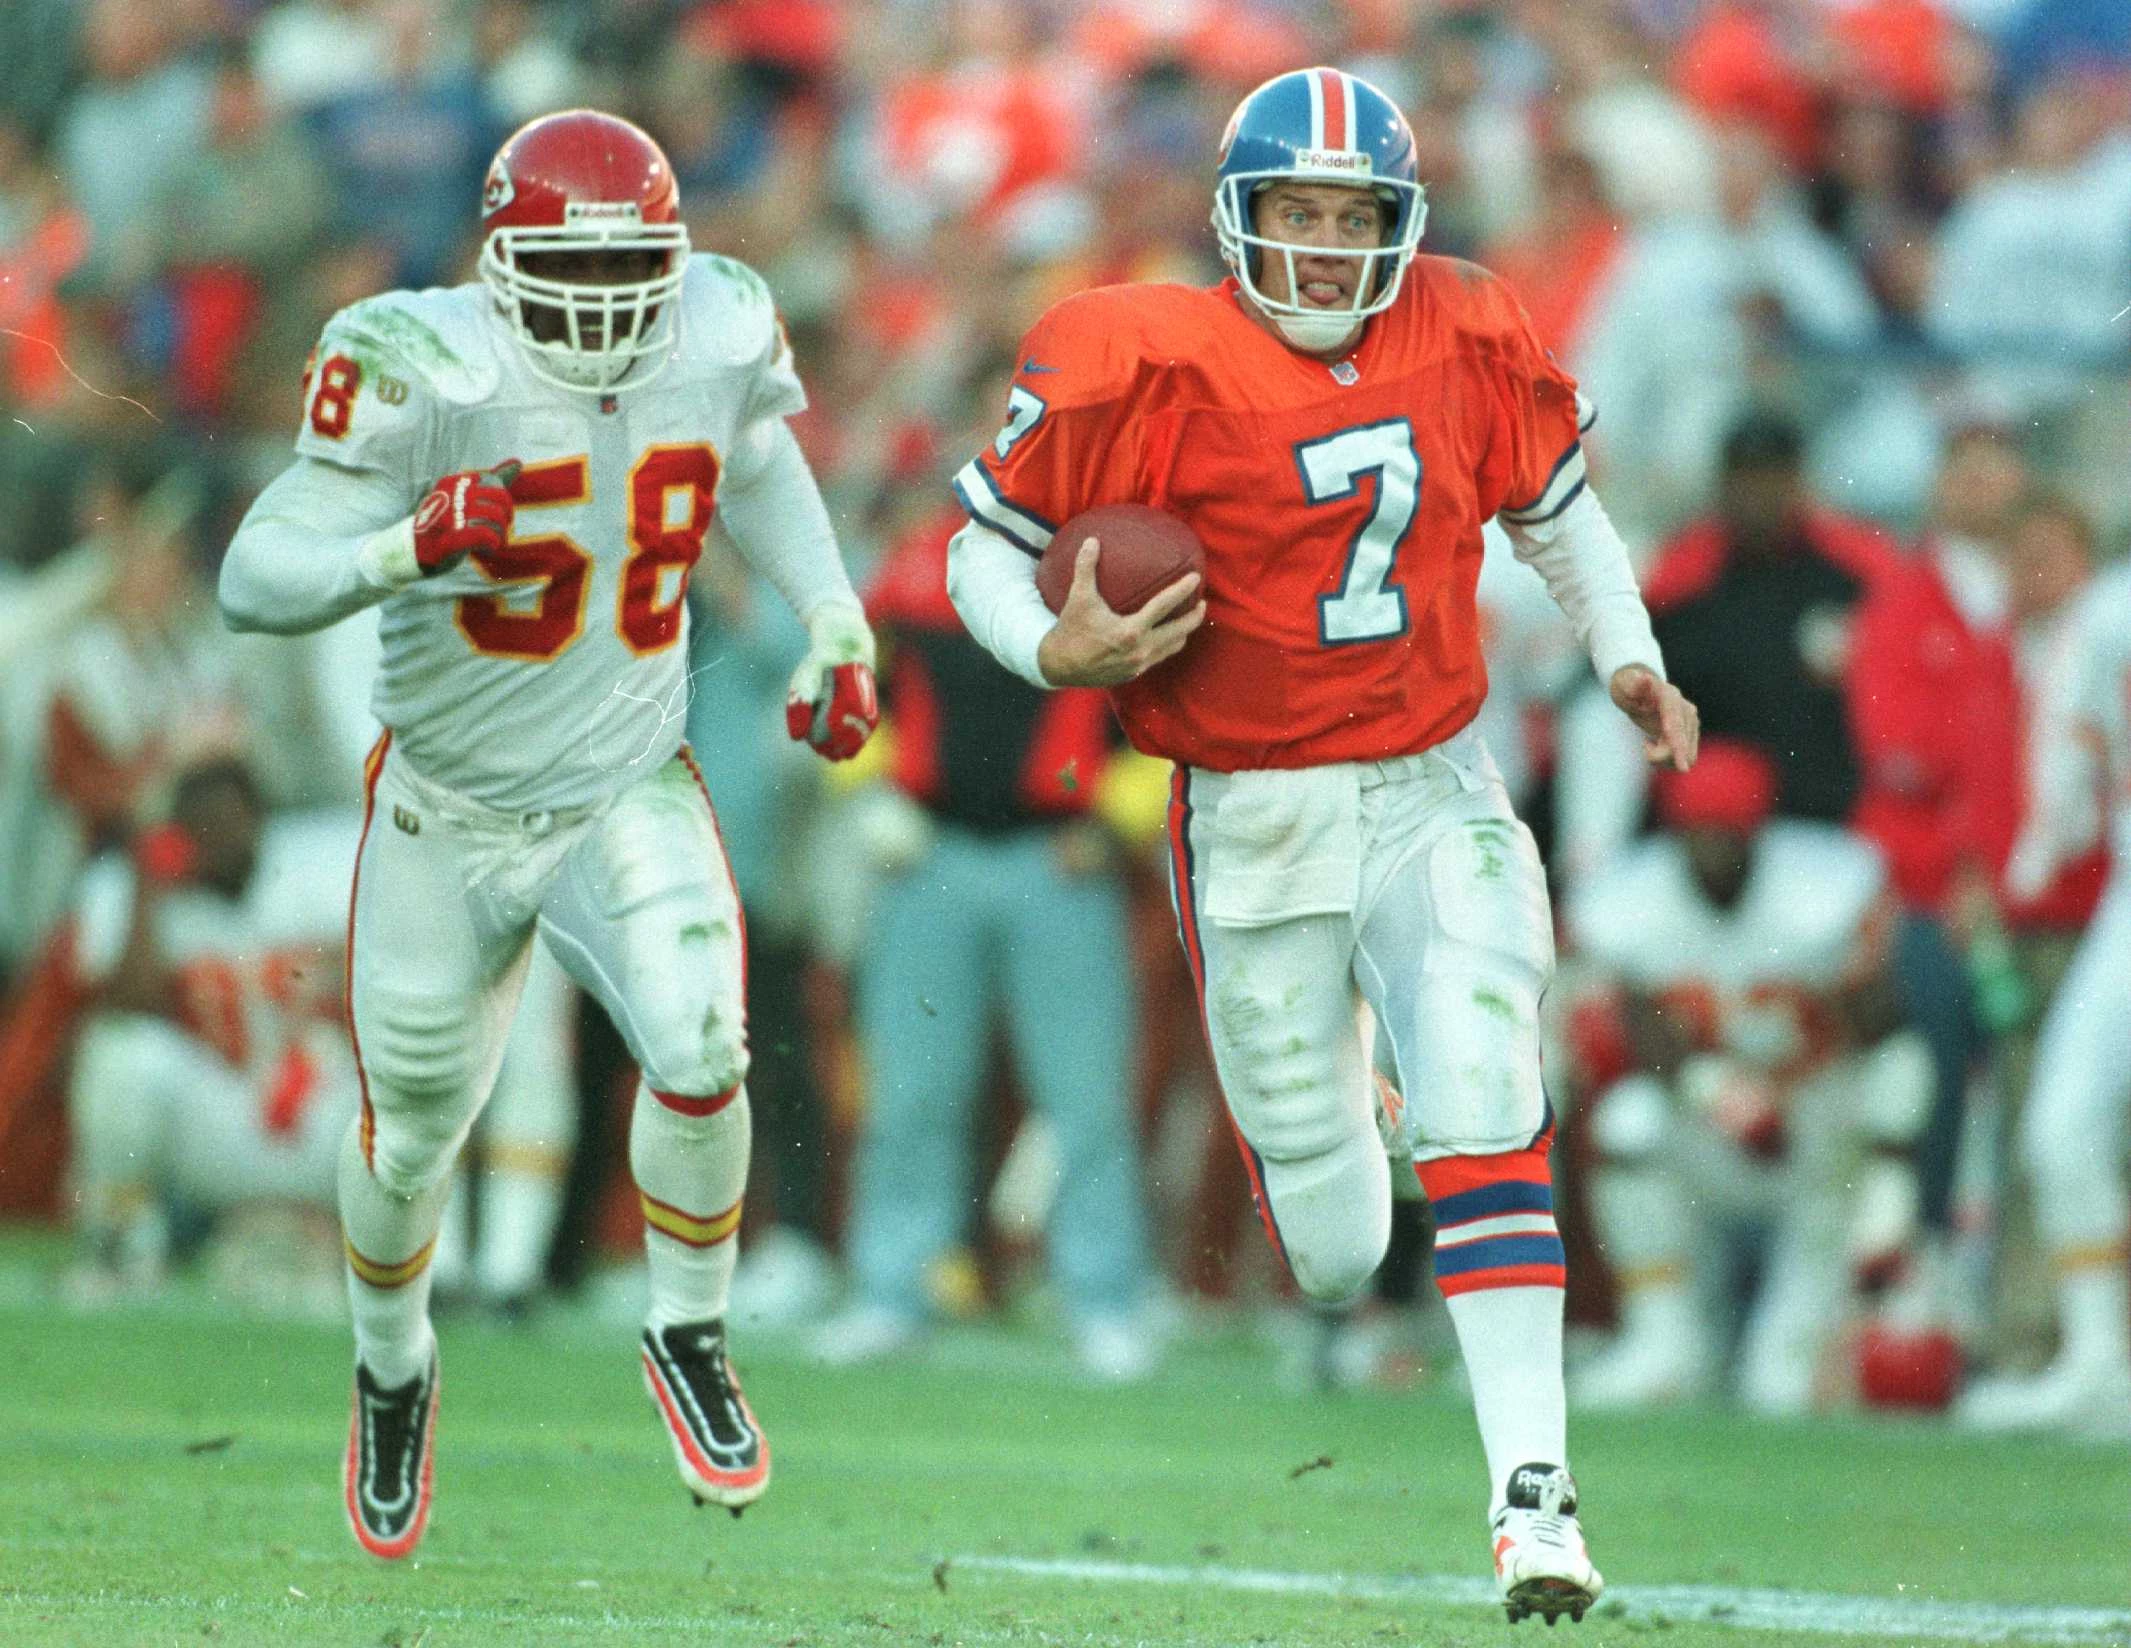 Stanford to retire John Elway's number 7 jersey - Rule Of Tree